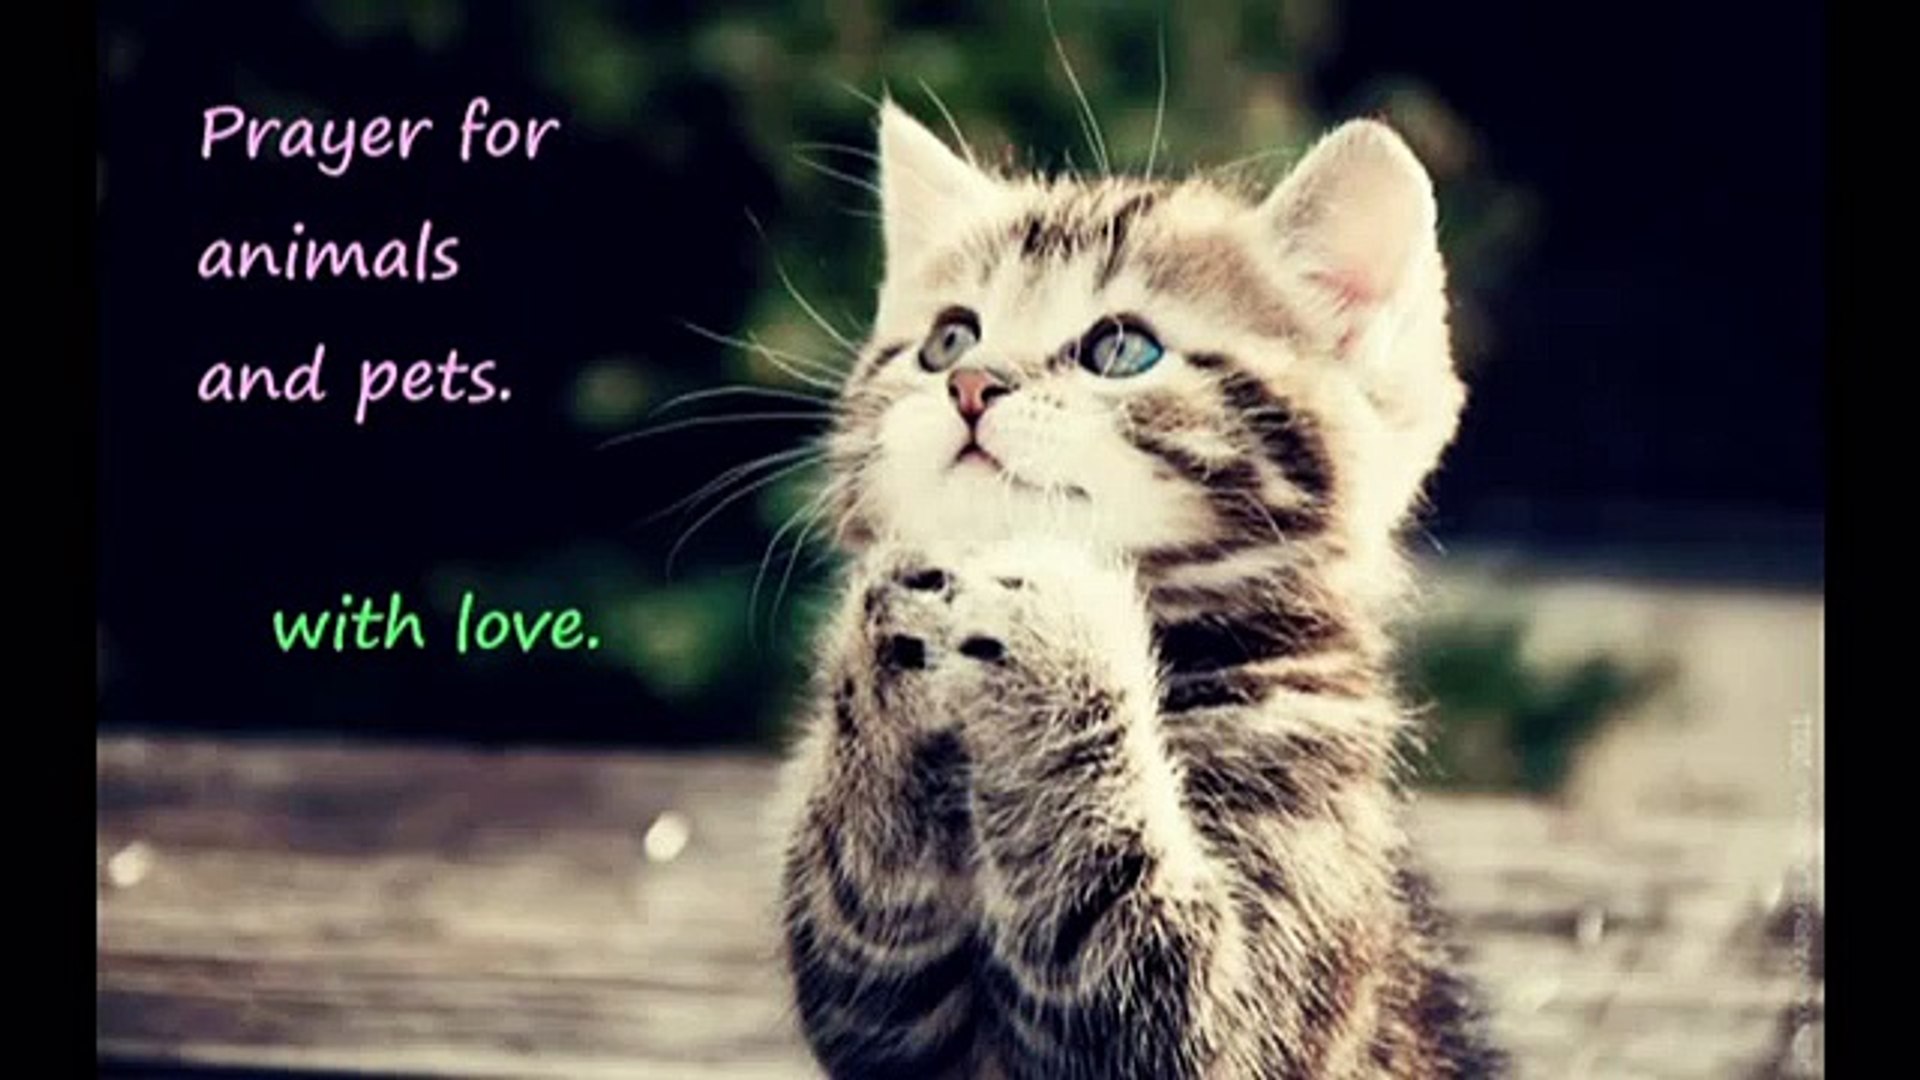 prayer for cats, dogs and other pets and animals